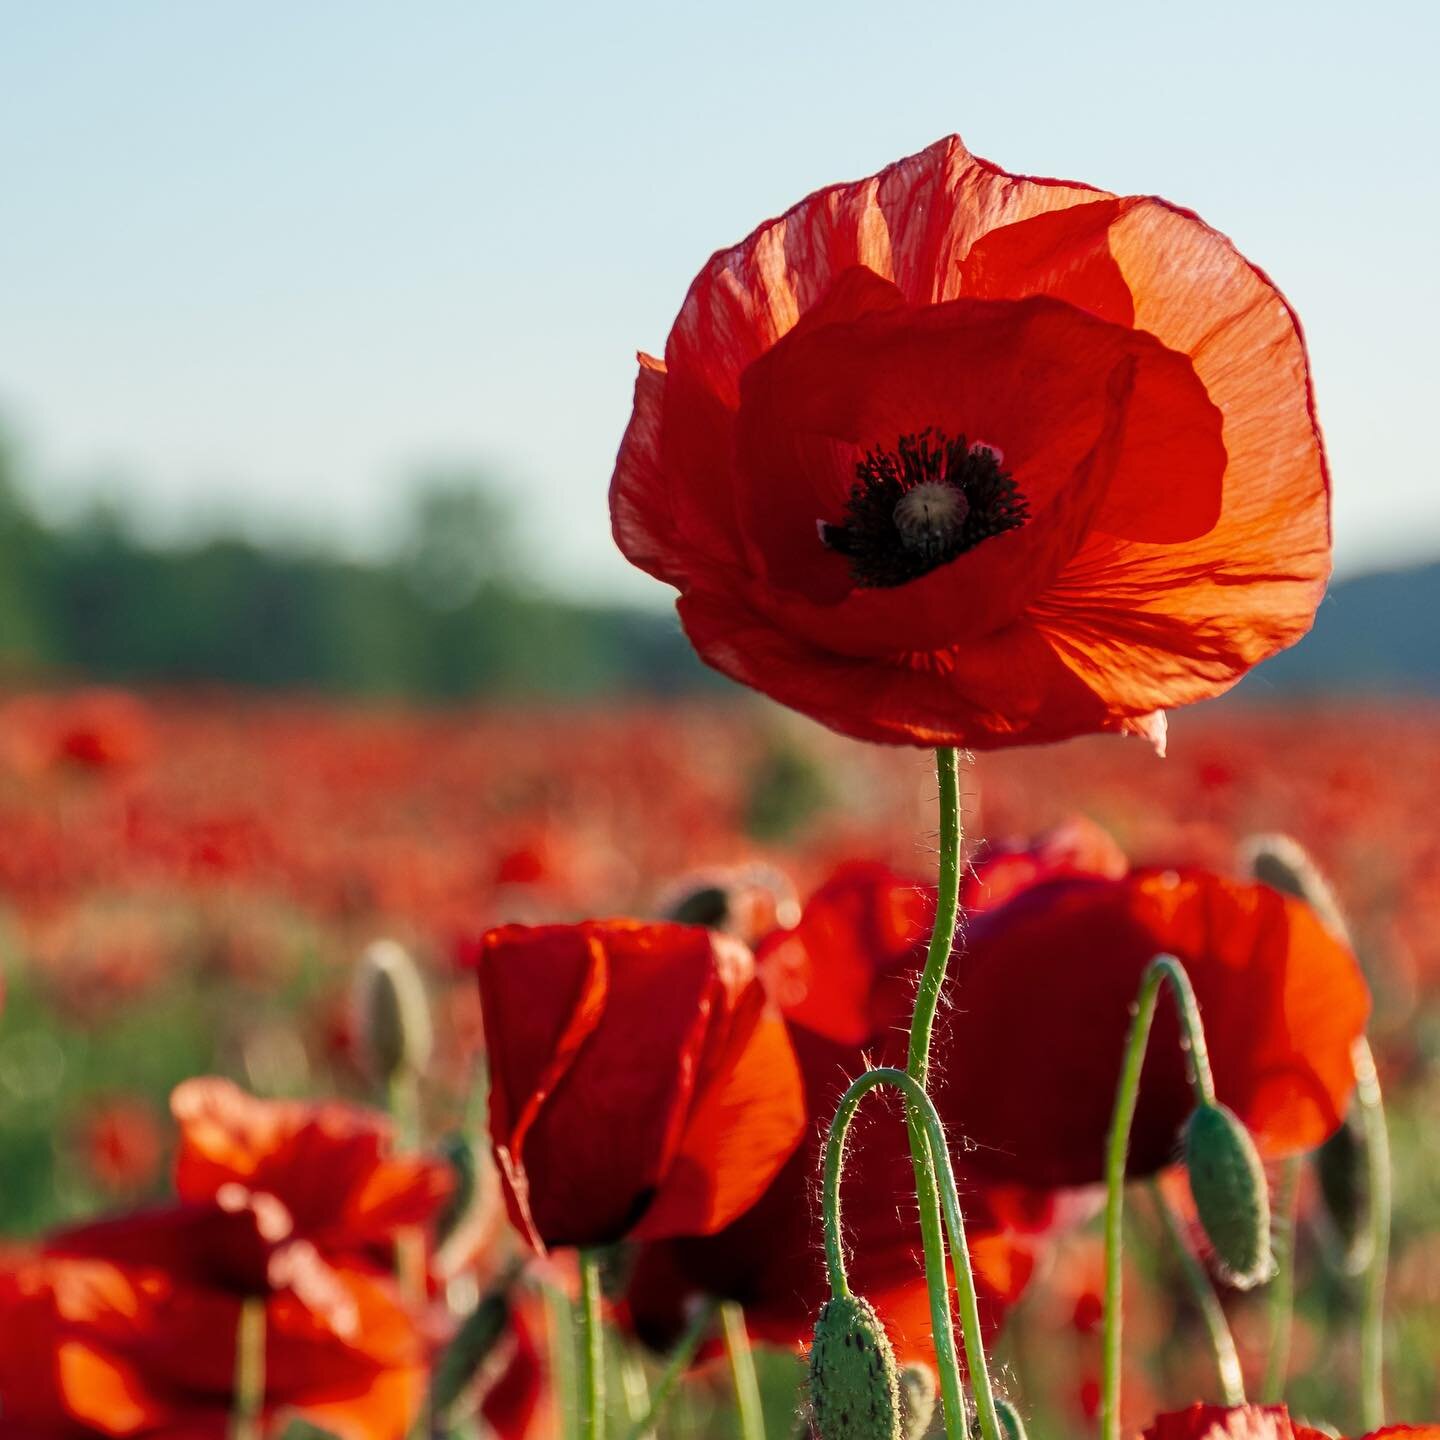 &quot;🌹 Honoring the brave souls who sacrificed for our freedom. On this Remembrance Day, let's remember and reflect on the sacrifices made for peace. Lest we forget. 🕊️ #RemembranceDay #LestWeForget #HonoringHeroes&quot;